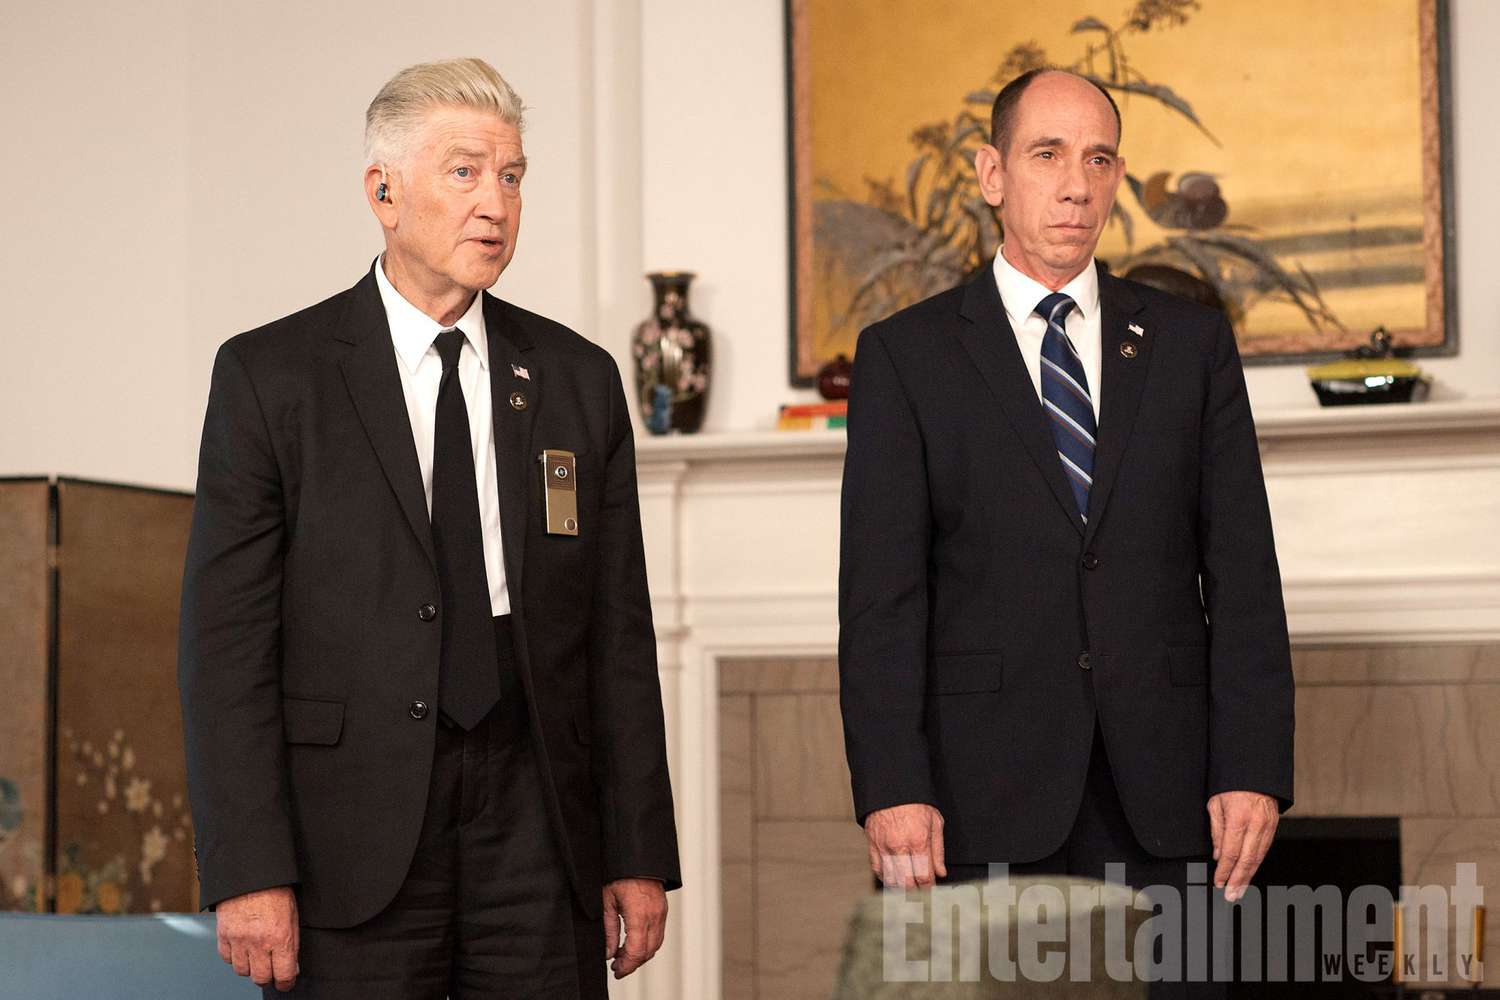 David Lynch and Miguel Ferrer